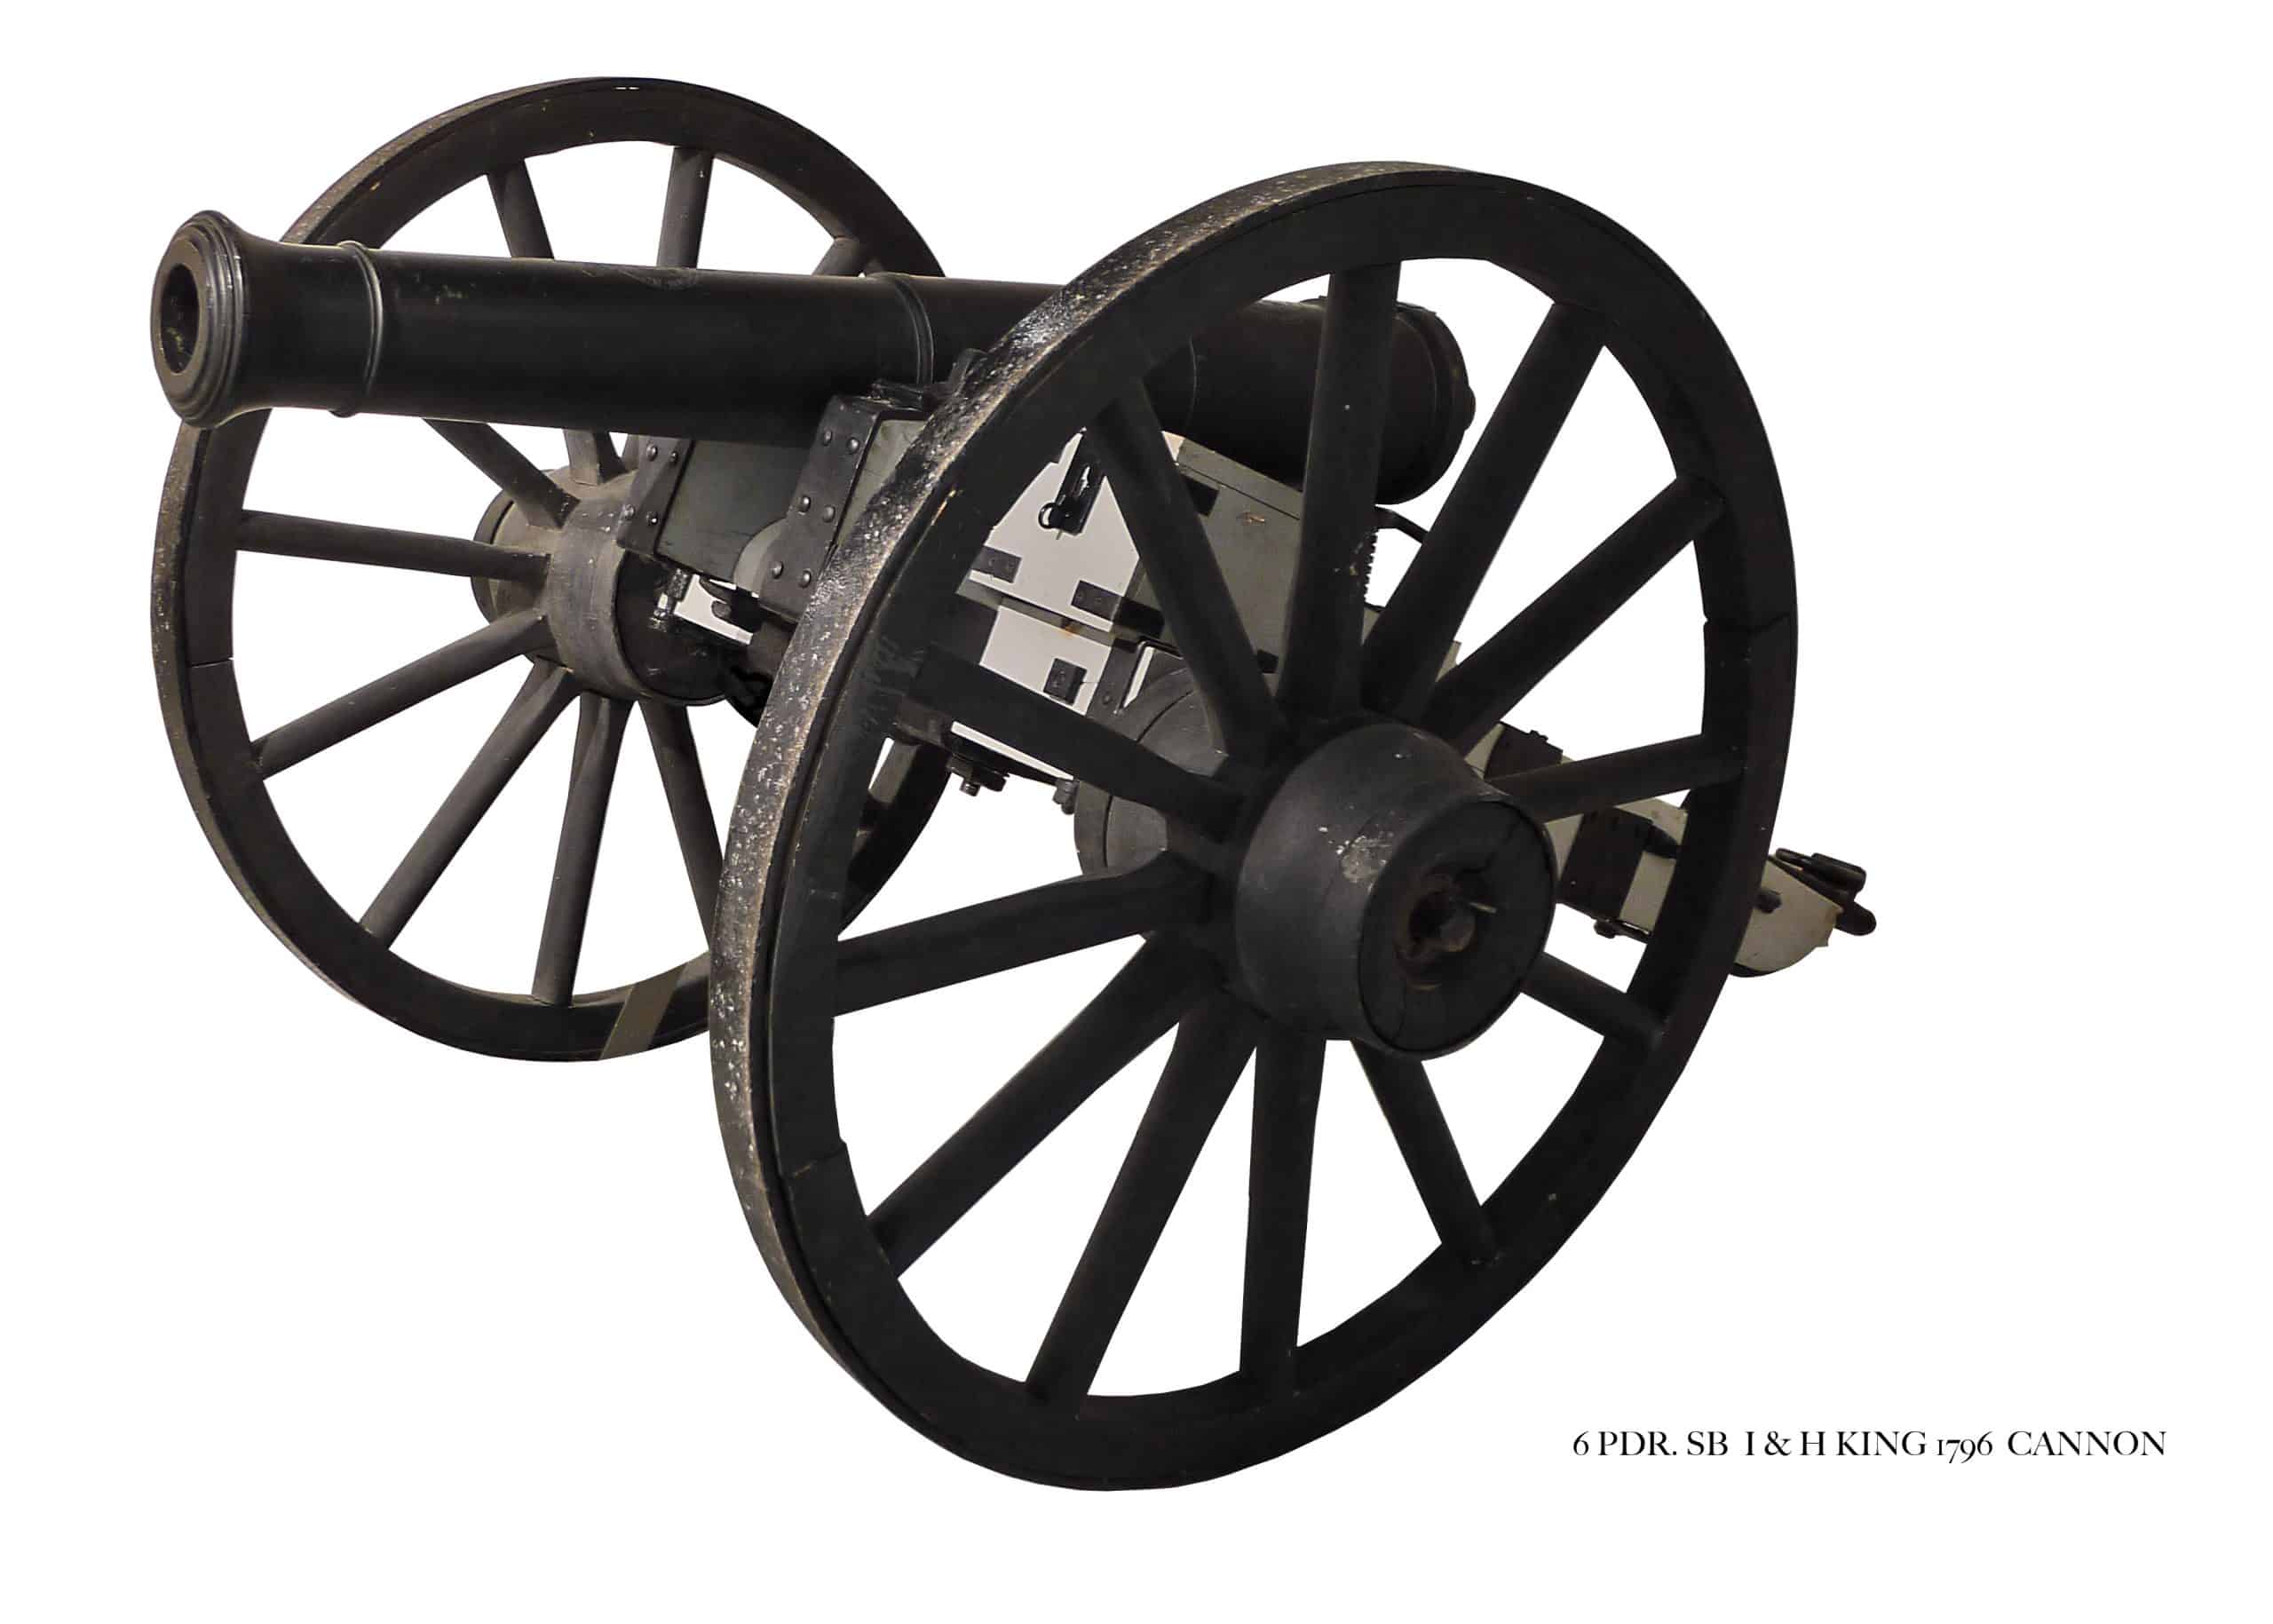 6-PDR.-SB-I-H-KING.-1796-CANNON-scaled